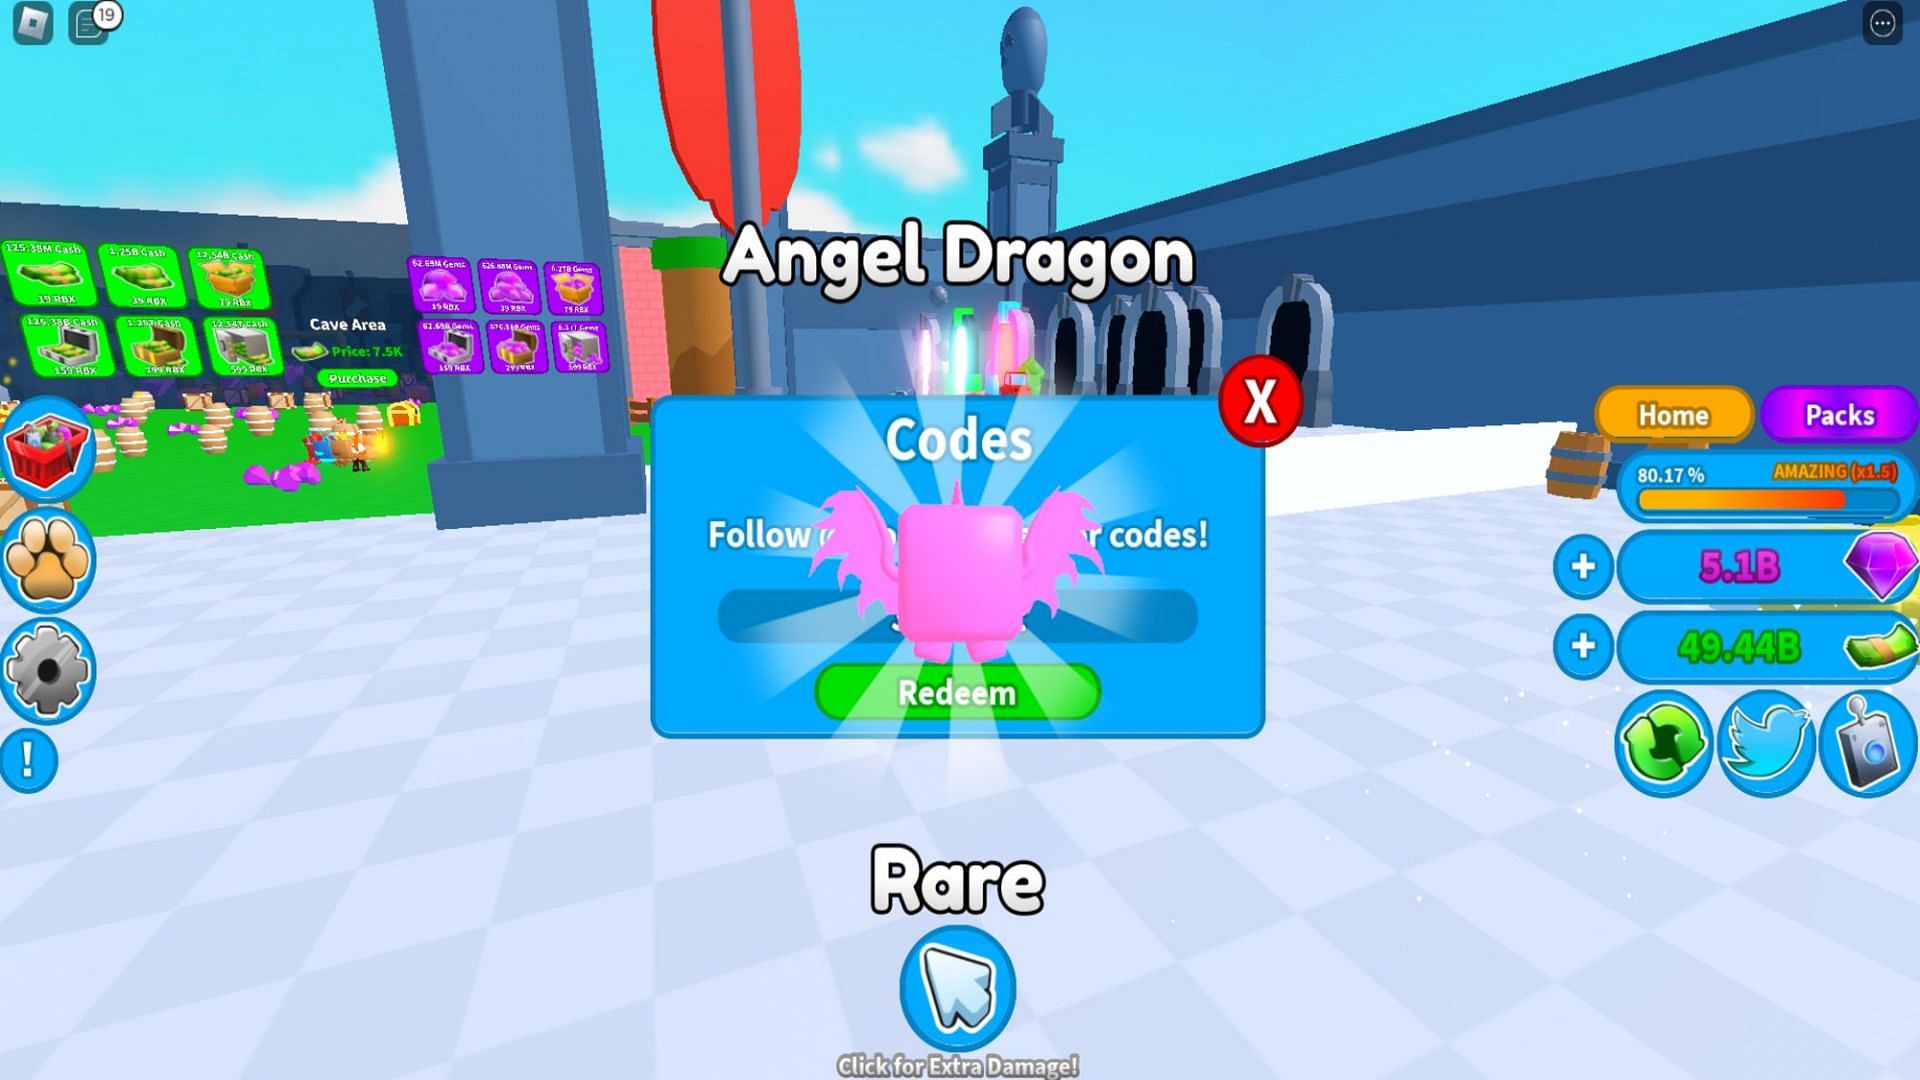 Code redemption in the game (Image via Roblox)